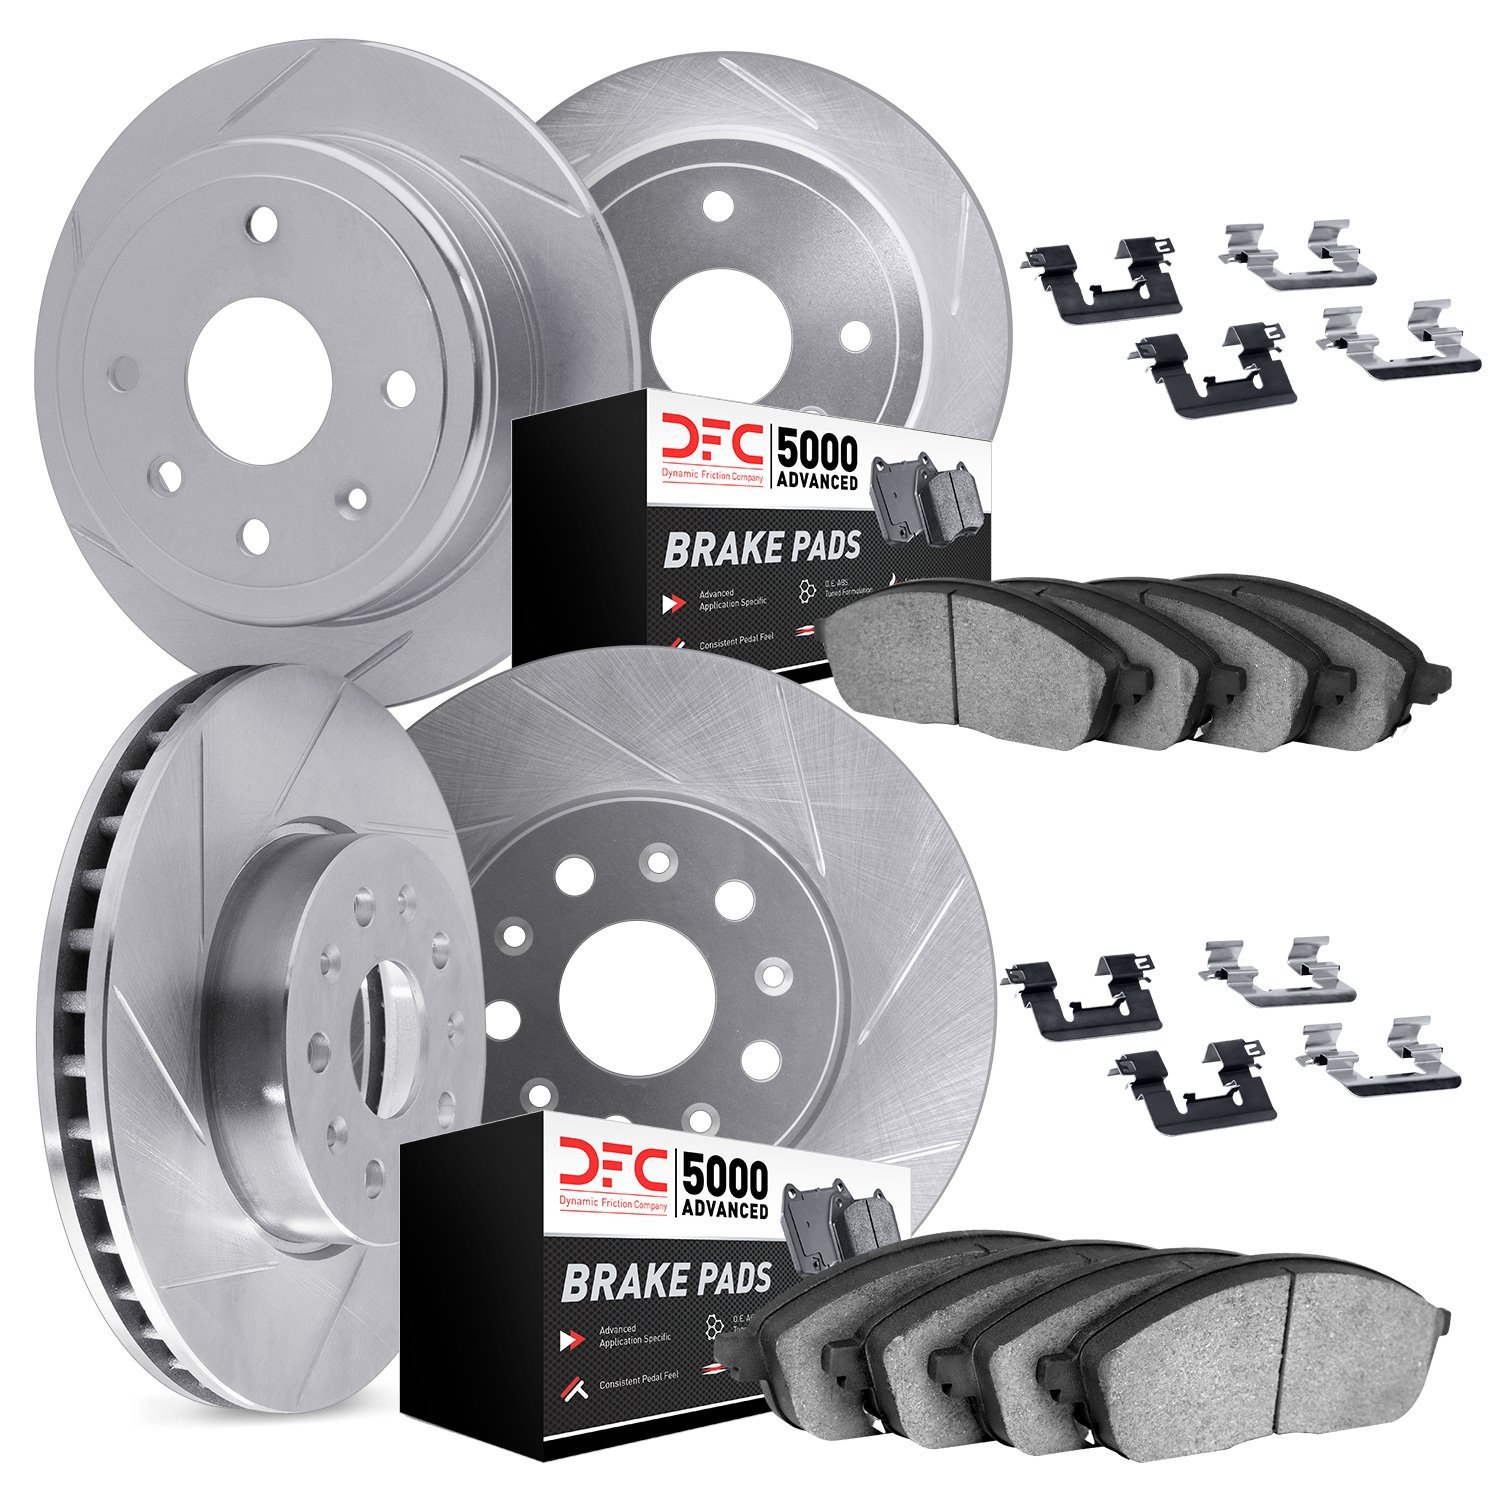 5514-59045 Slotted Brake Rotors w/5000 Advanced Brake Pads Kit & Hardware [Silver], 2012-2016 Acura/Honda, Position: Front and R